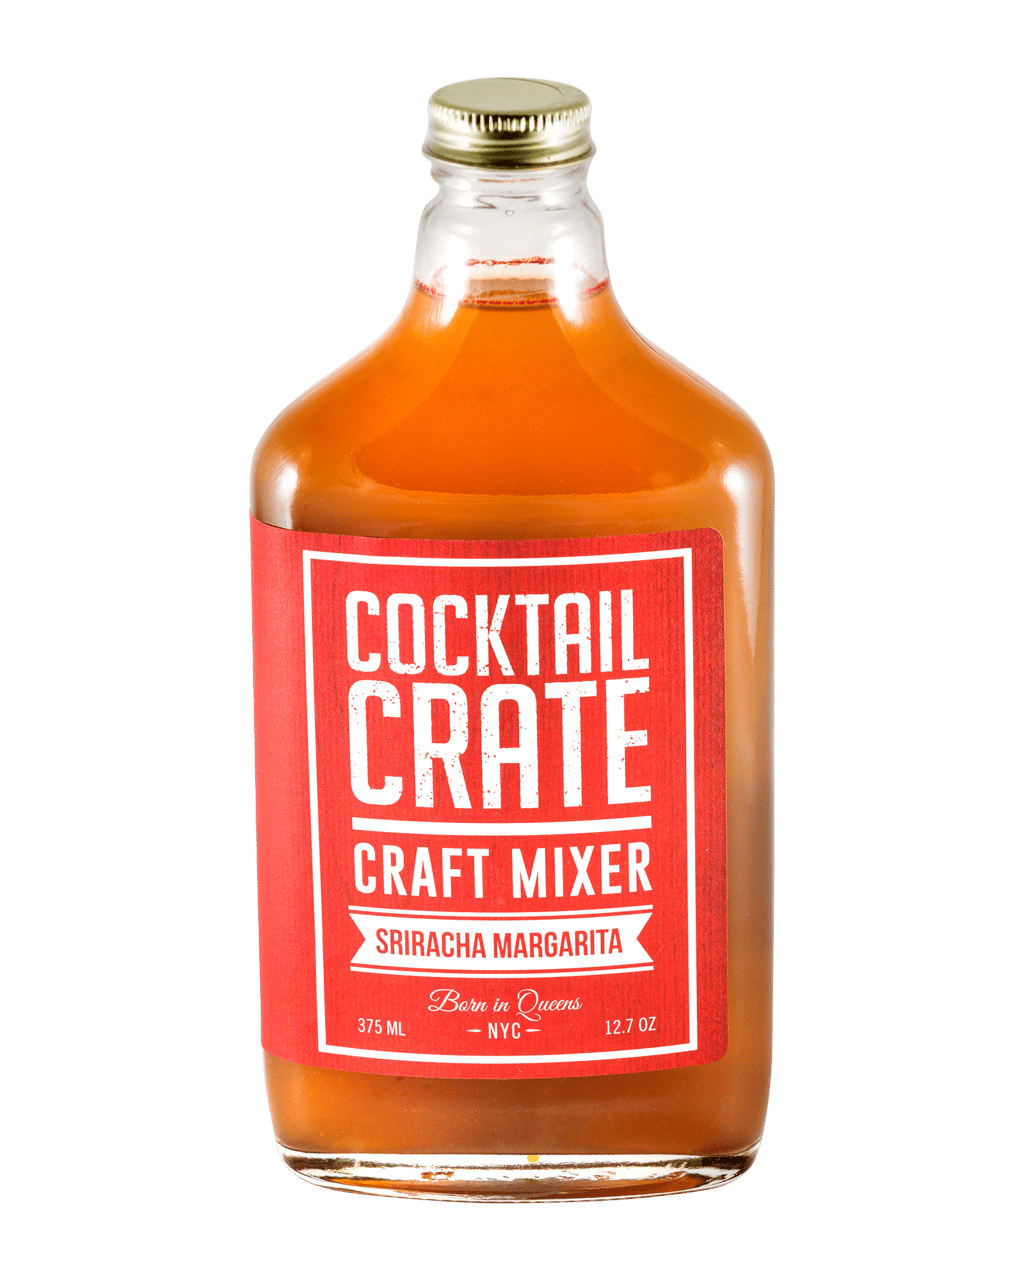 Spiced Old Fashioned - Cocktail Crate